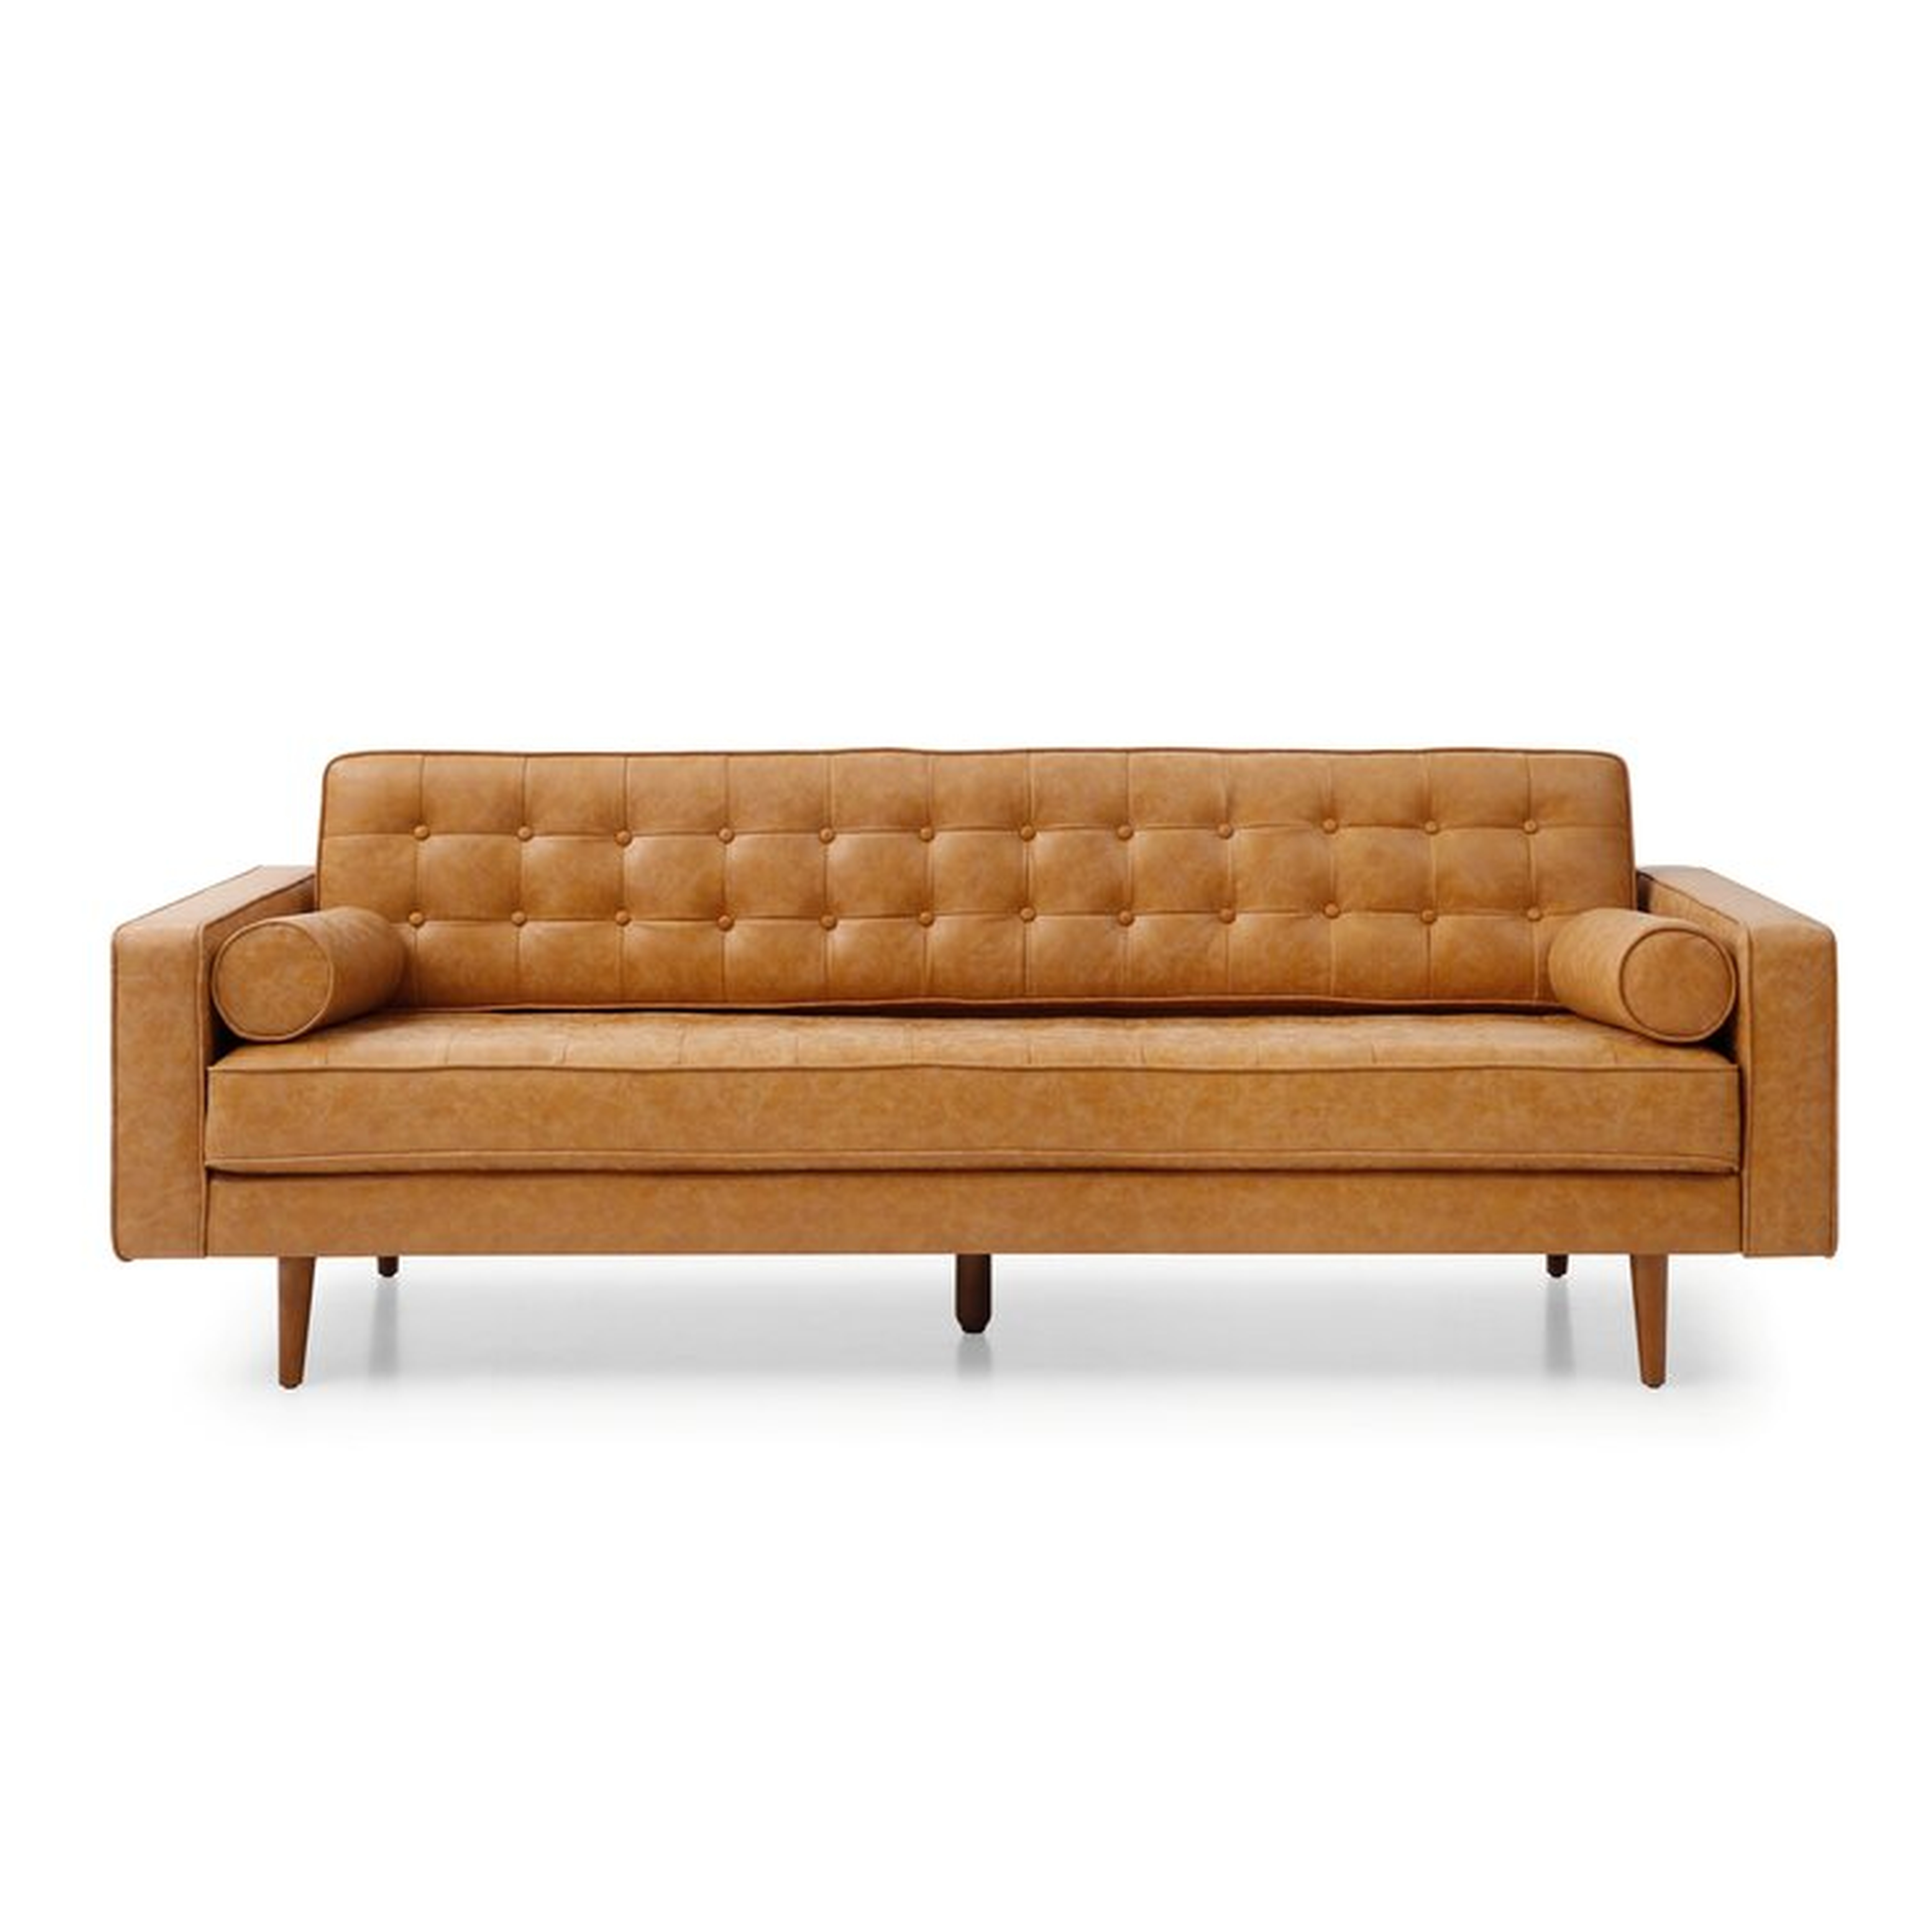 Rika 85'' Faux Leather Square Arm Sofa with Reversible Cushions - Wayfair